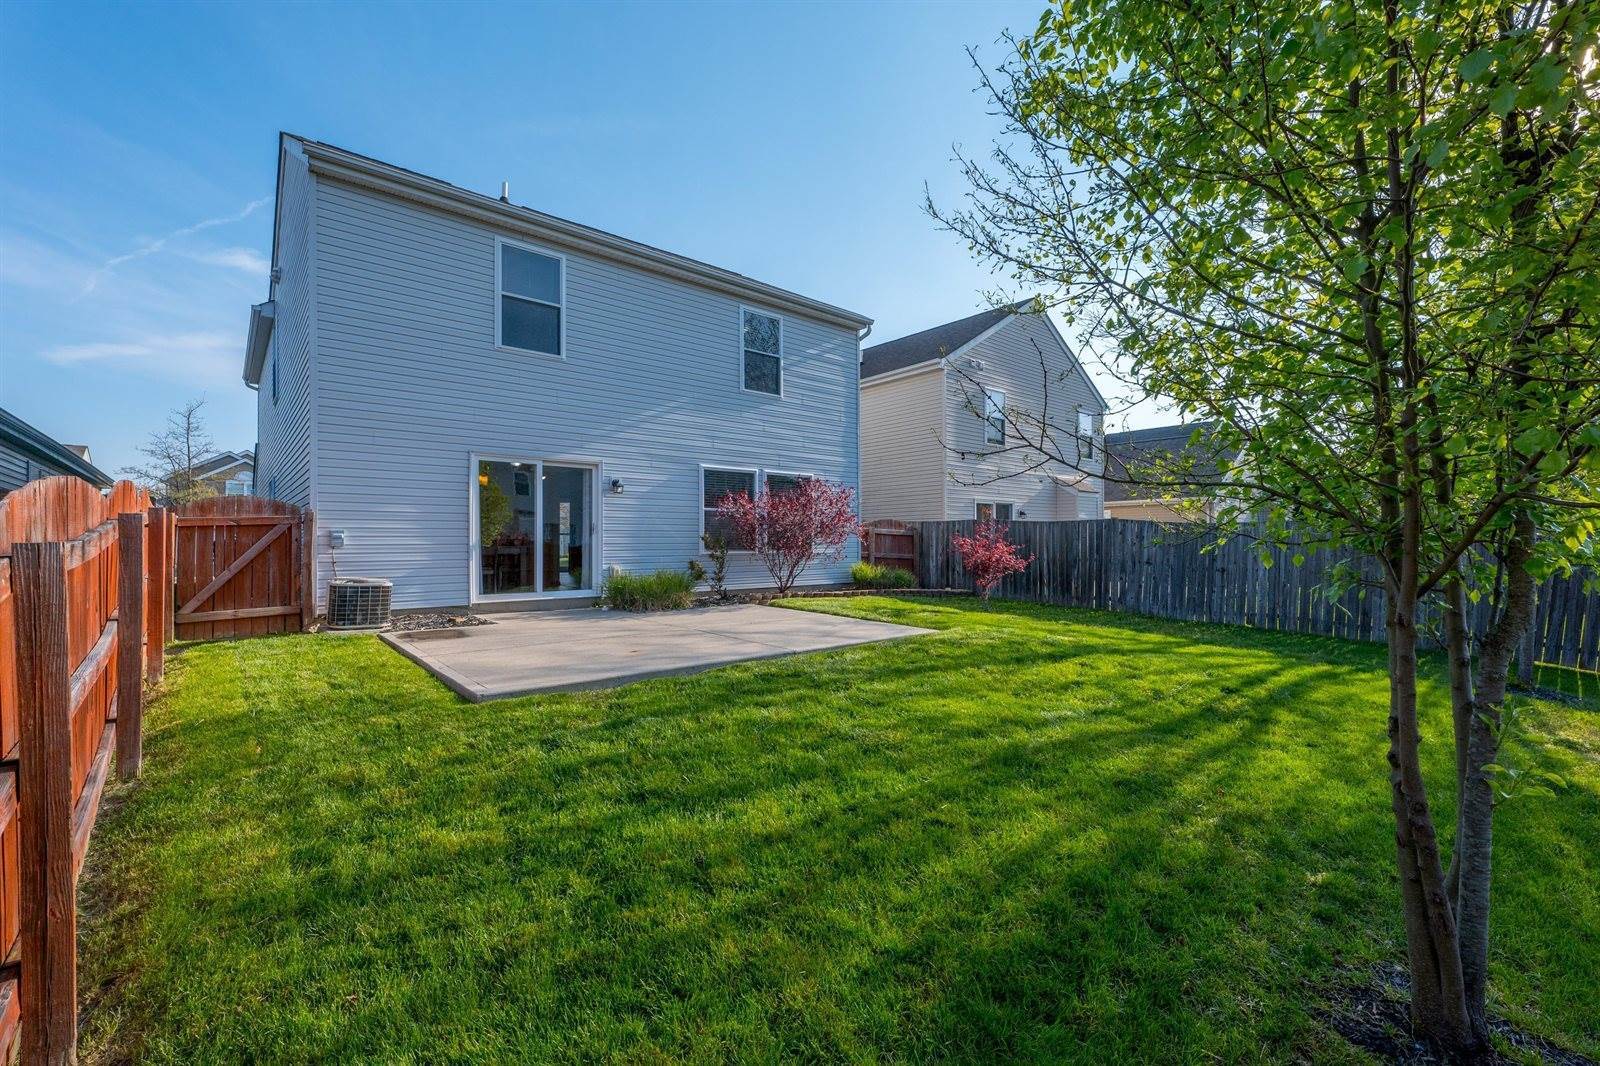 6895 Manor Crest Lane, Canal Winchester, OH 43110